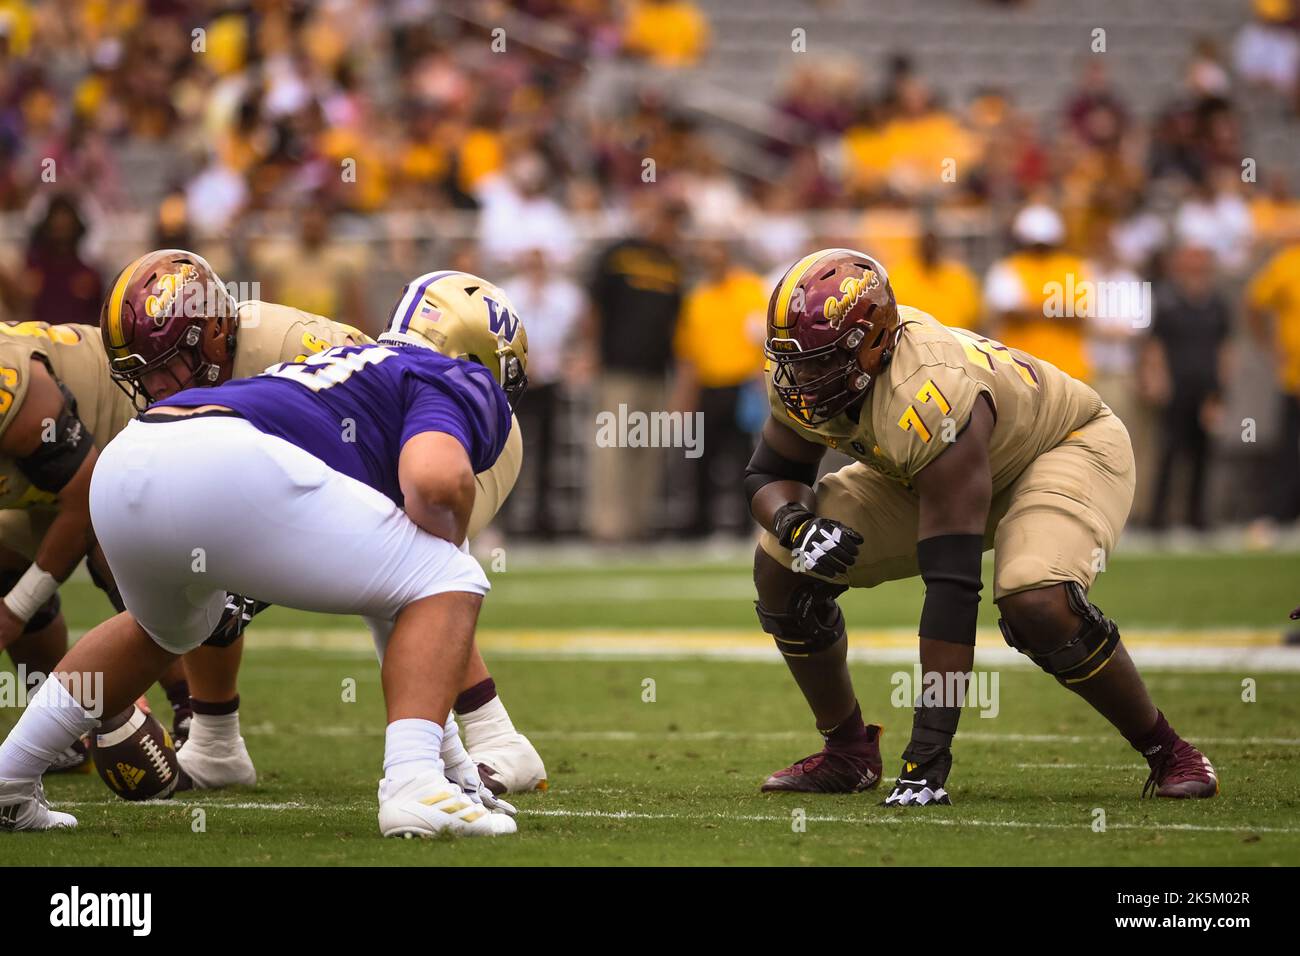 Arizona State offensive lineman LaDarius Henderson (77) line up in the first quarter of an NCAA college football game against the Washington Huskies i Stock Photo